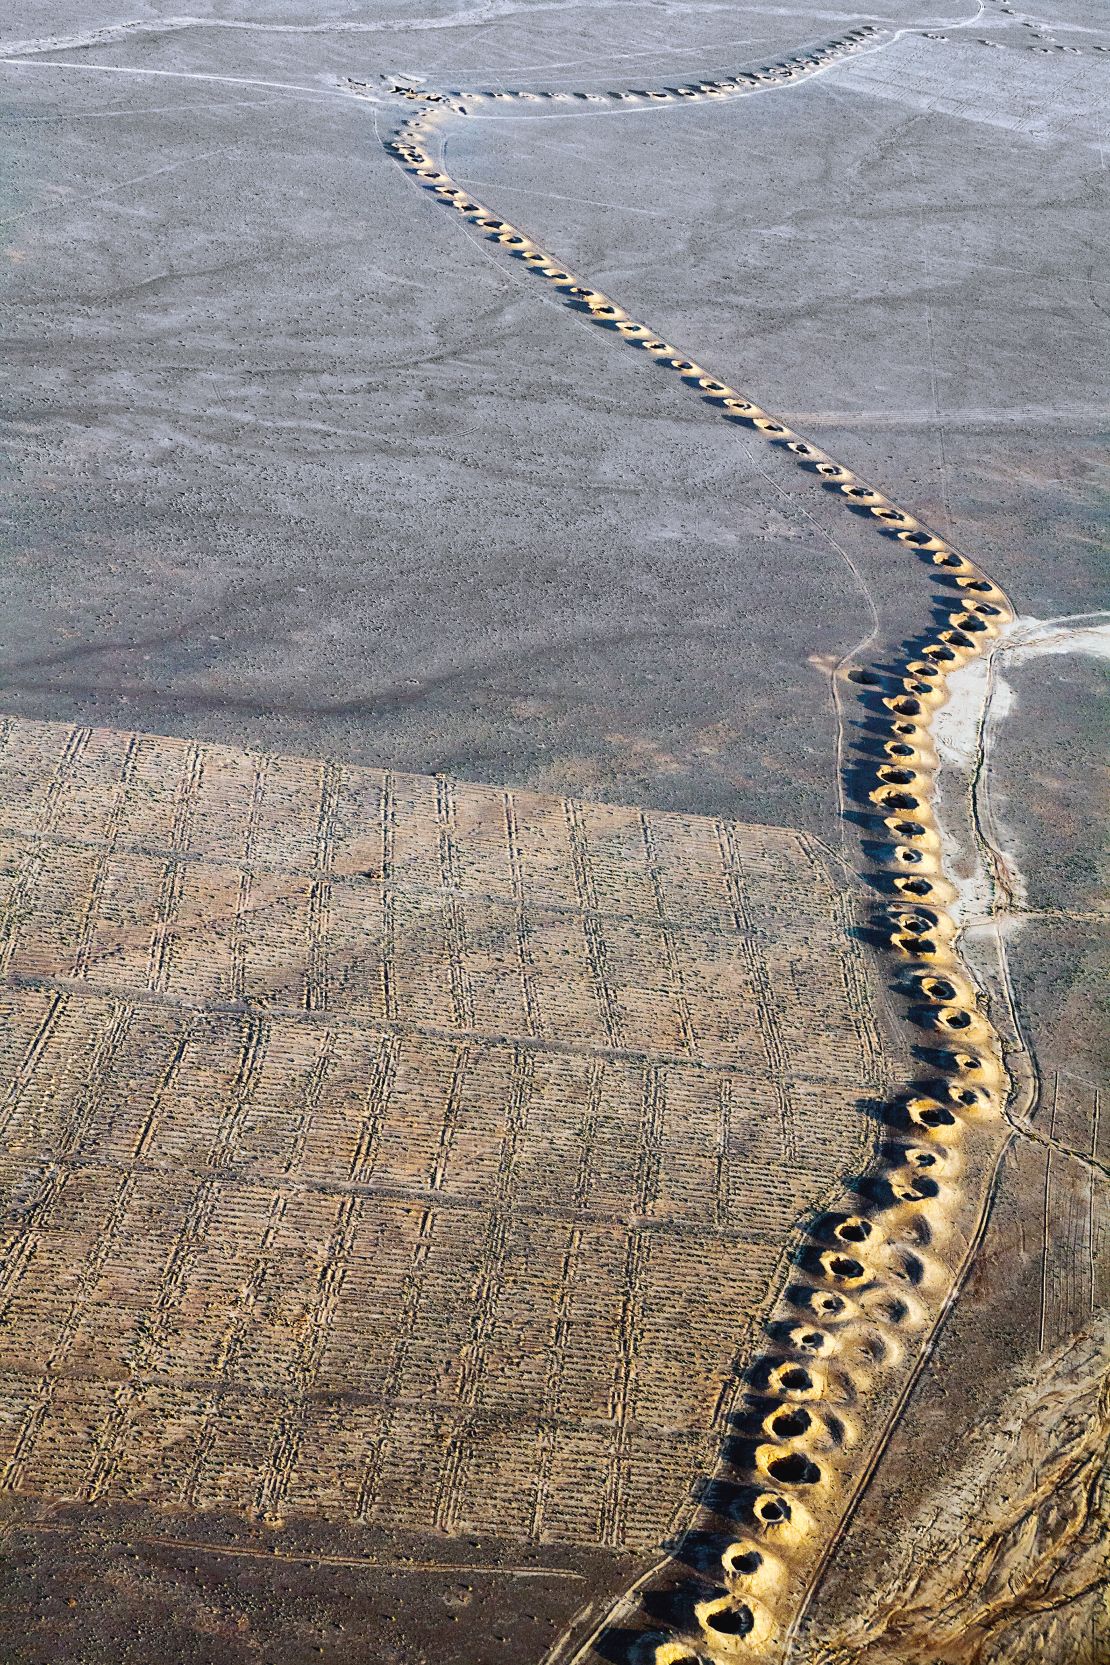 A line of evenly spaced spoil craters snakes along the surface of the desert from the high Elburz Mountains to the Plains of Iraq and is the only evidence of an invisible, subterranean man-made water stream called a qanat, first constructed by the Persians during the early years of the first millennium BCE.